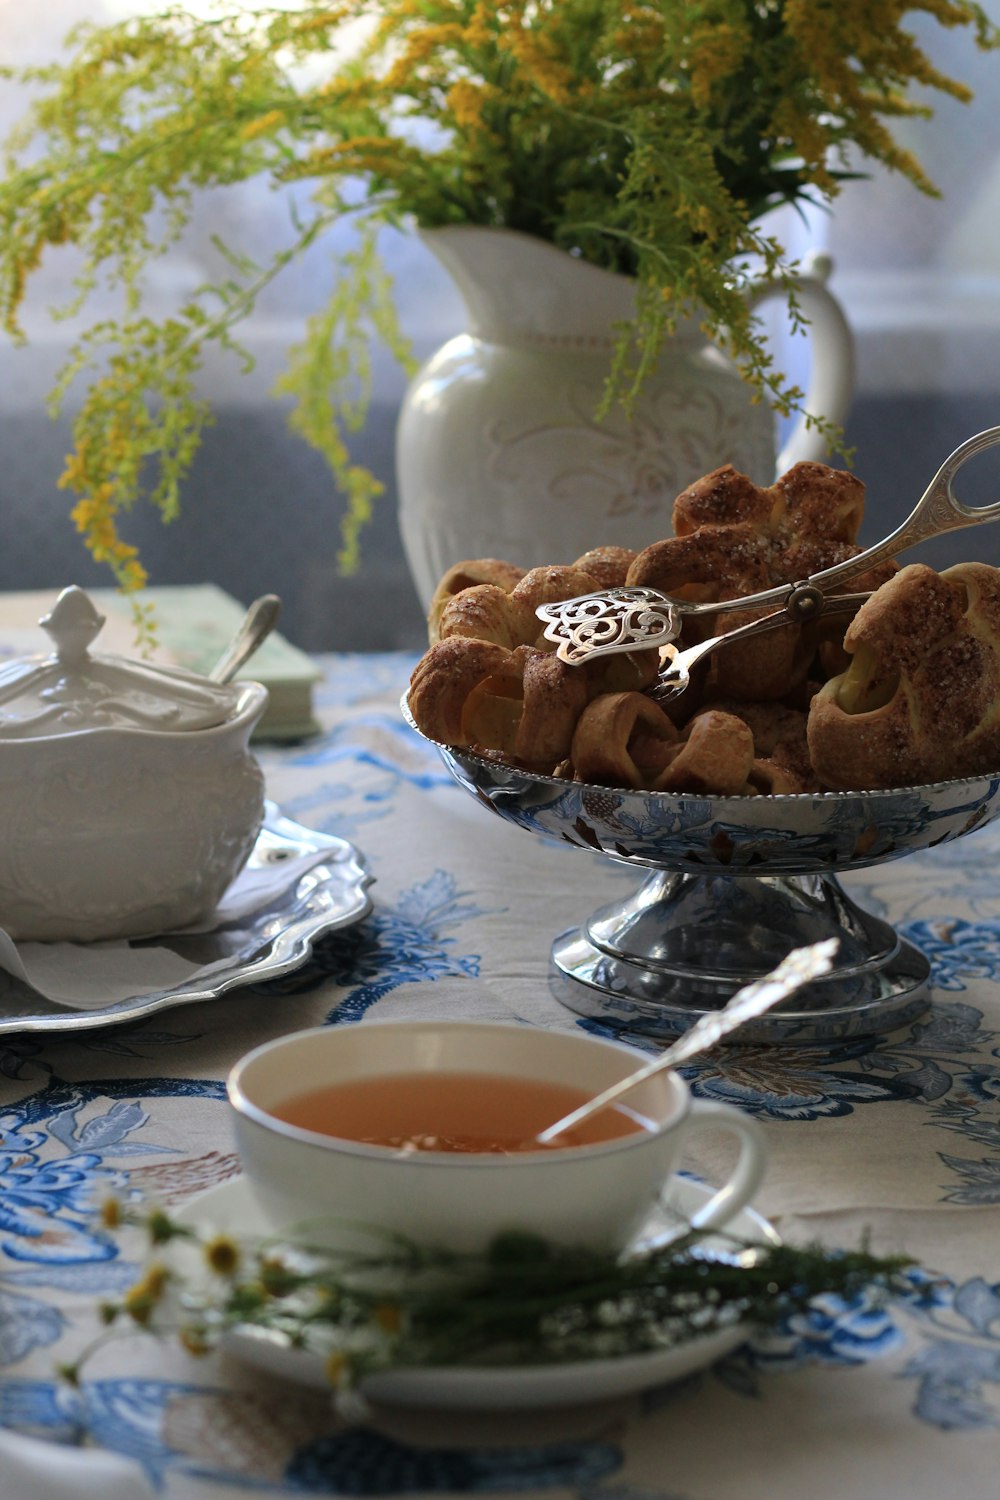 cookies on stainless steel bowl beside white ceramic teacup with saucer